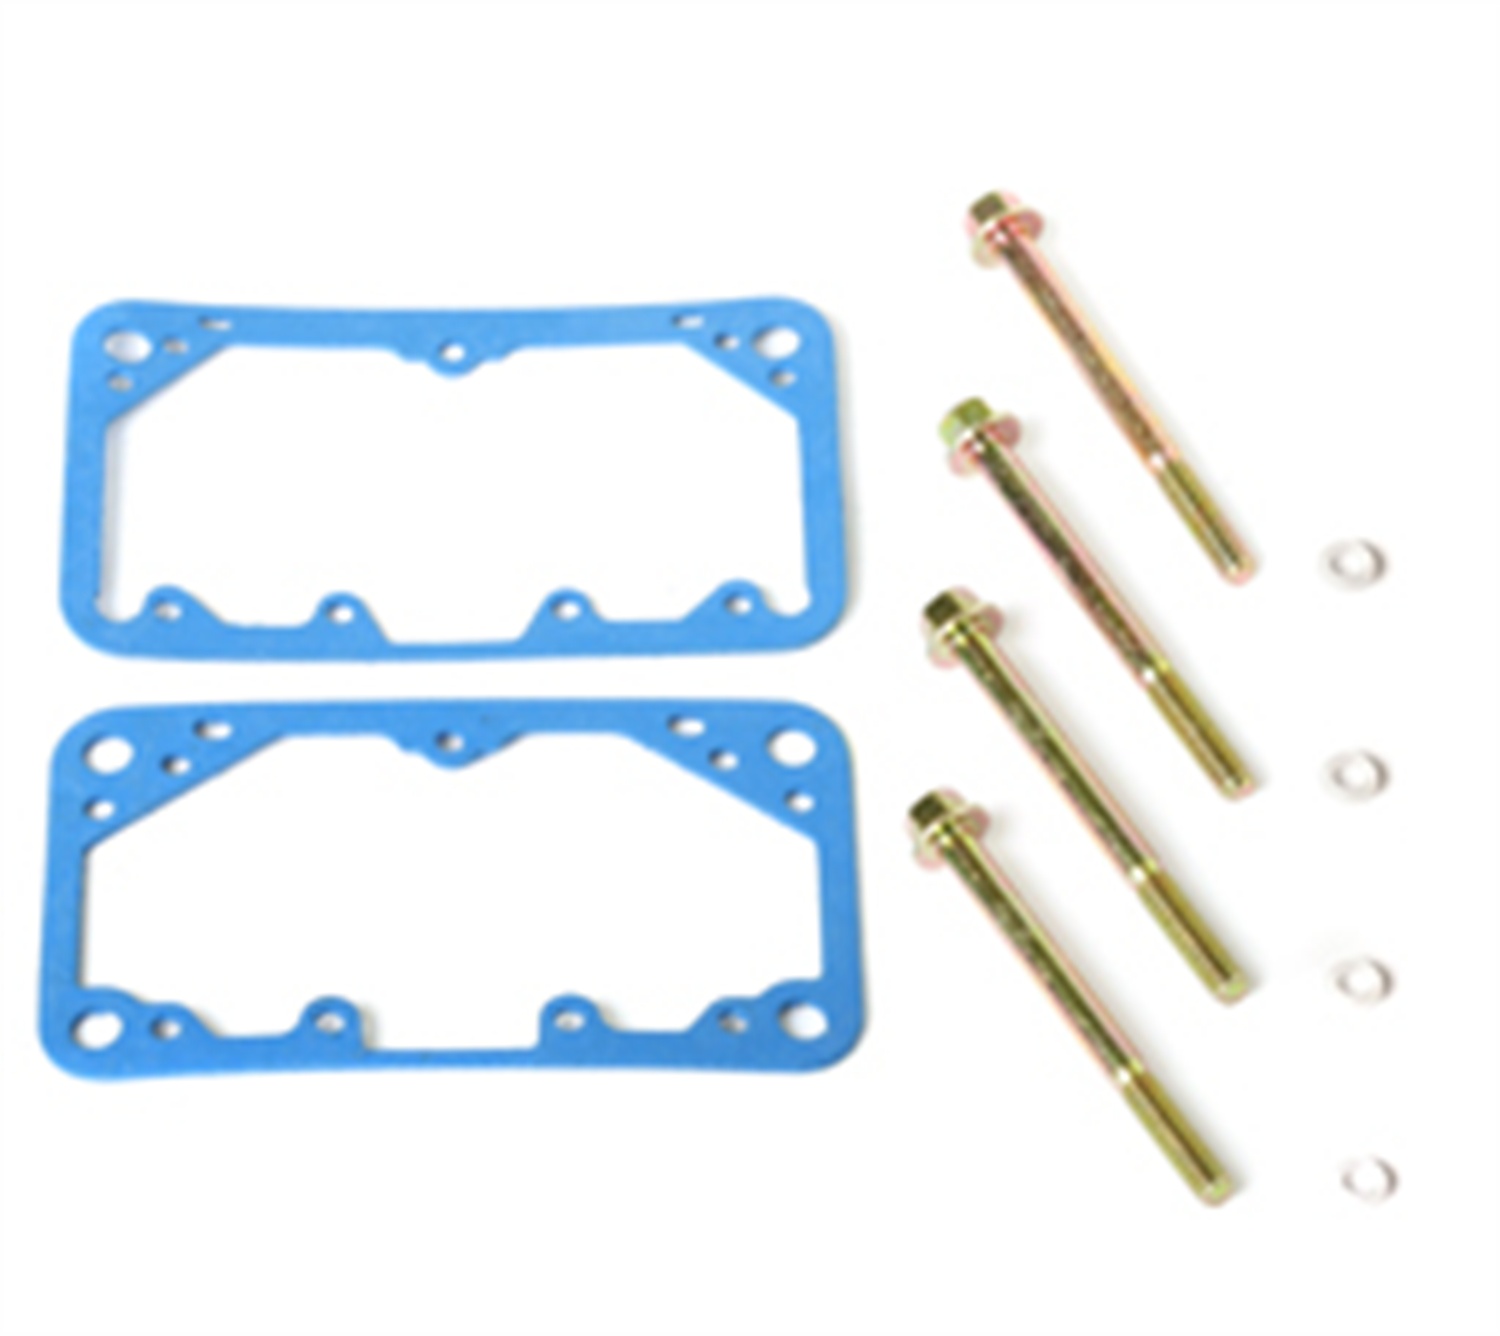 Holley Performance Holley Performance 26-124 Fuel Bowl Screw & Gasket Kit